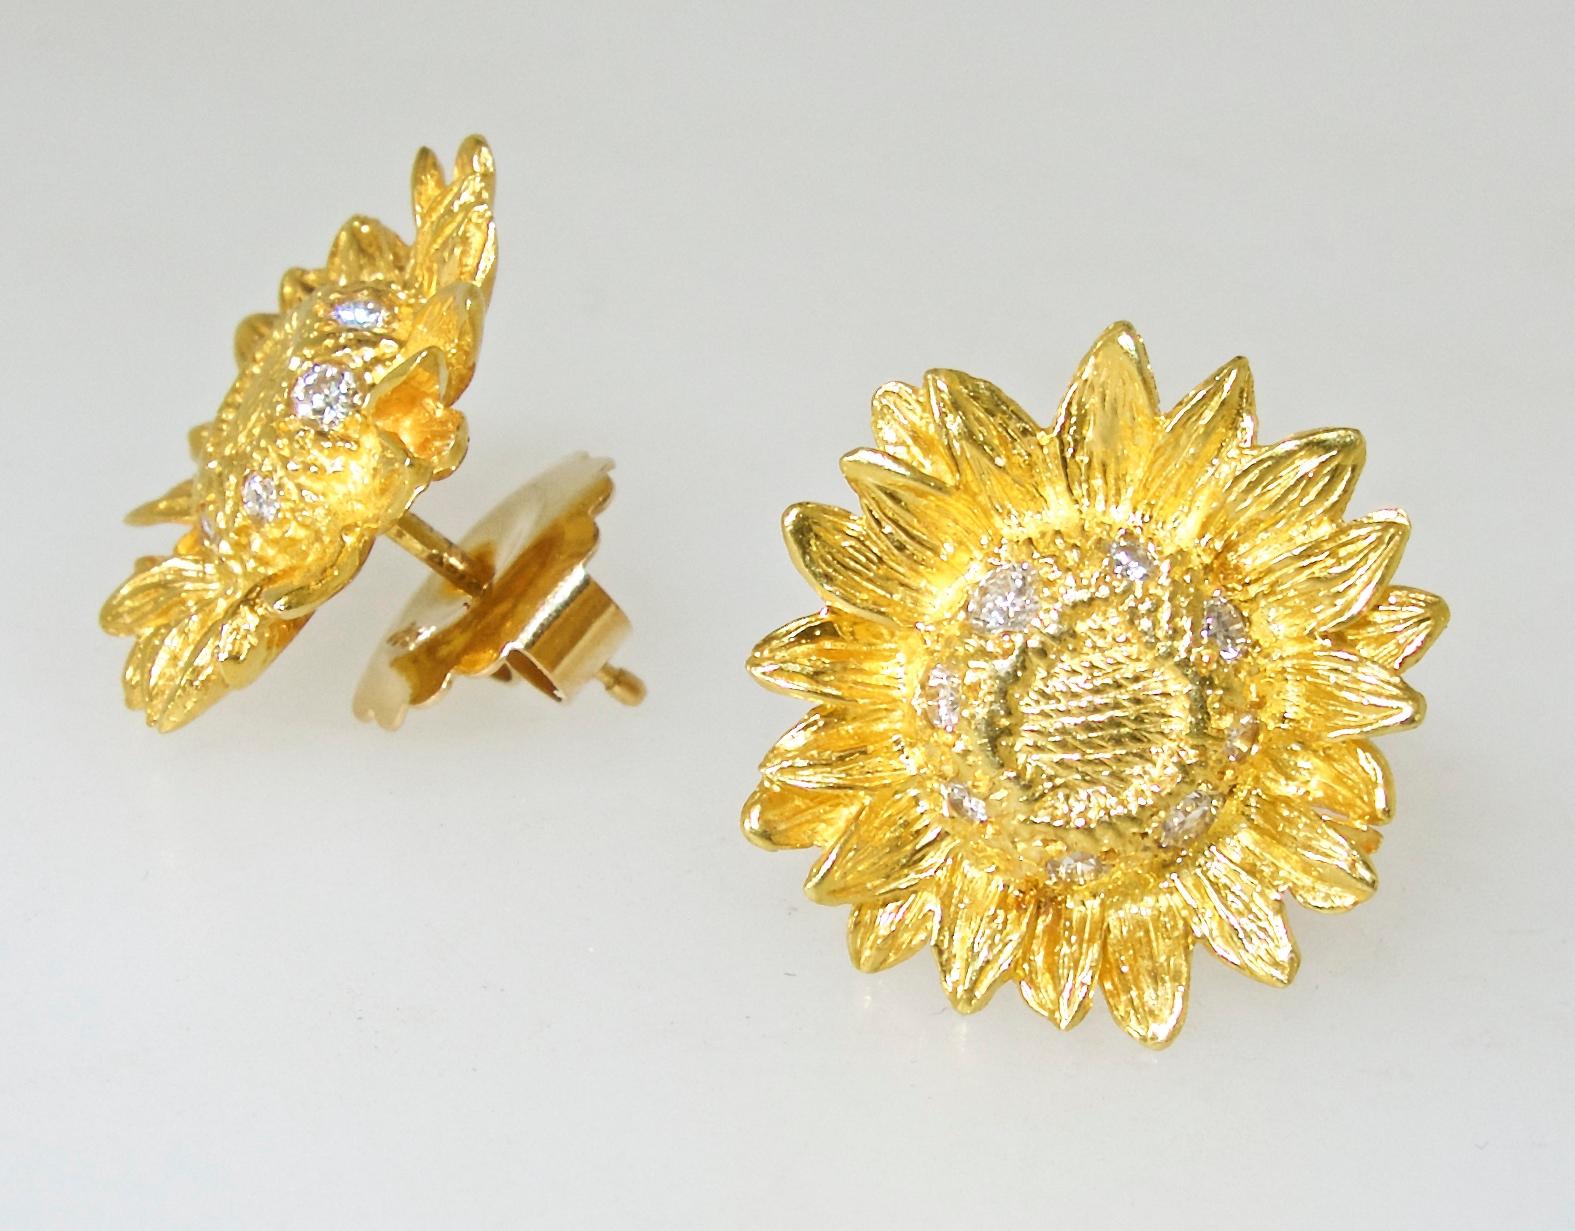 Asprey London sunflower motif earrings set with 16 small white brilliant cut diamonds.   They are .75 inches in diameter and now for a pierced ear, we can also alter them for a non-pierced ear.  Made by the famous London jewelry firm, Asprey & Co.